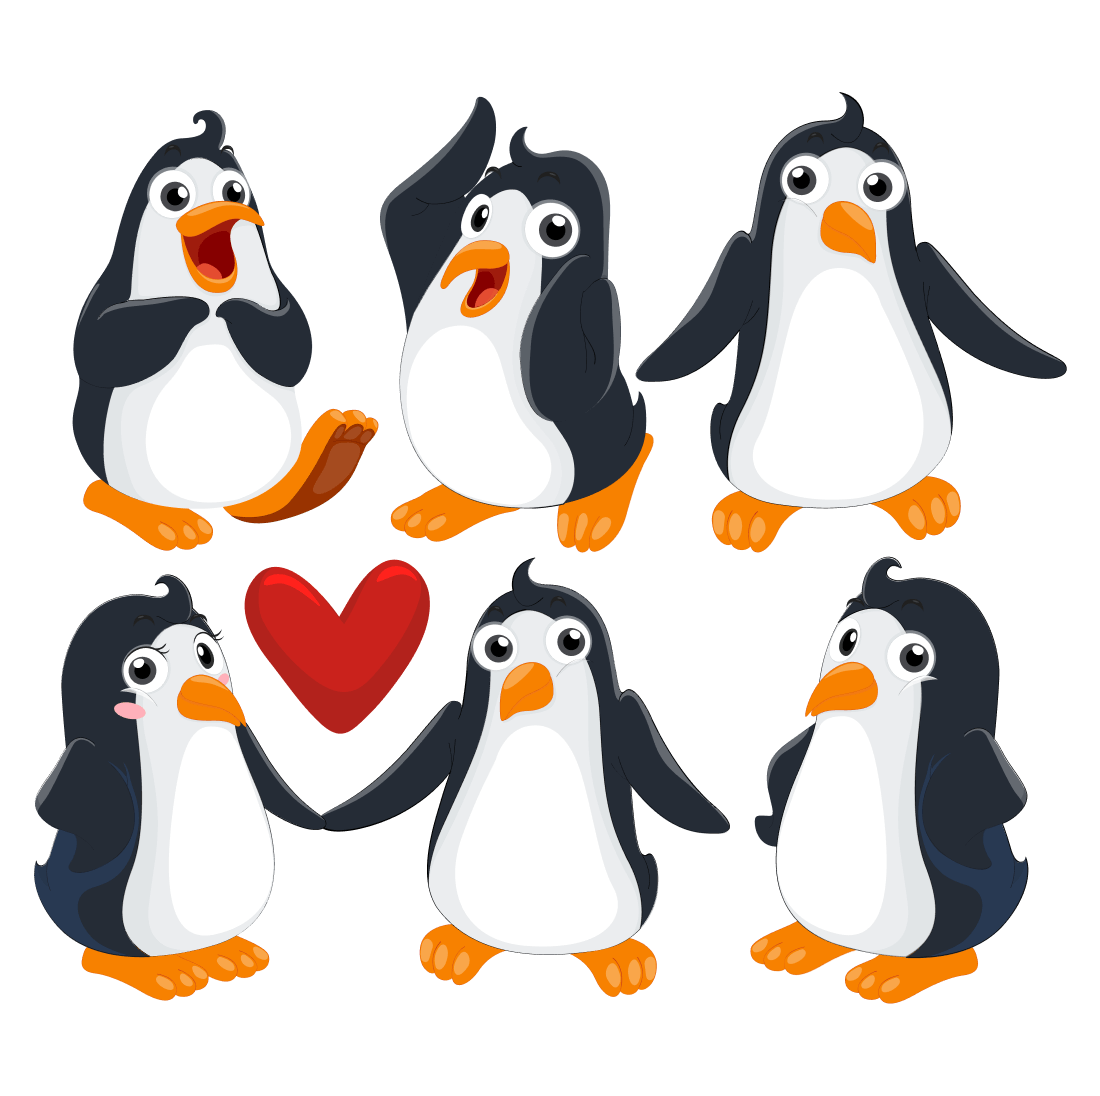 Set of penguins with different poses and emotions.